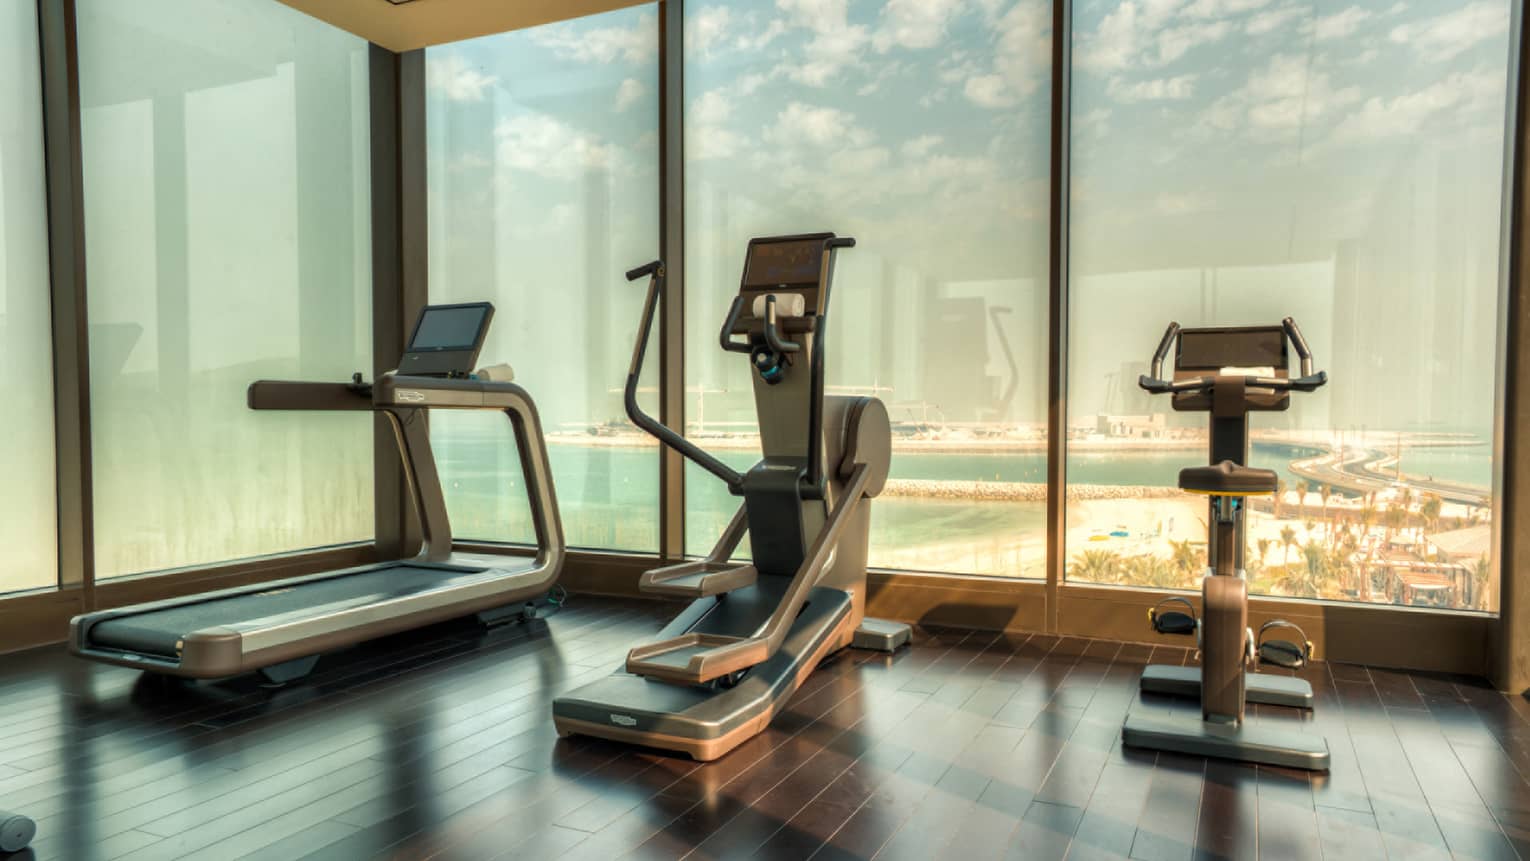 A treadmill, elliptical machine and cardio bike side-by-side at window overlooking beach